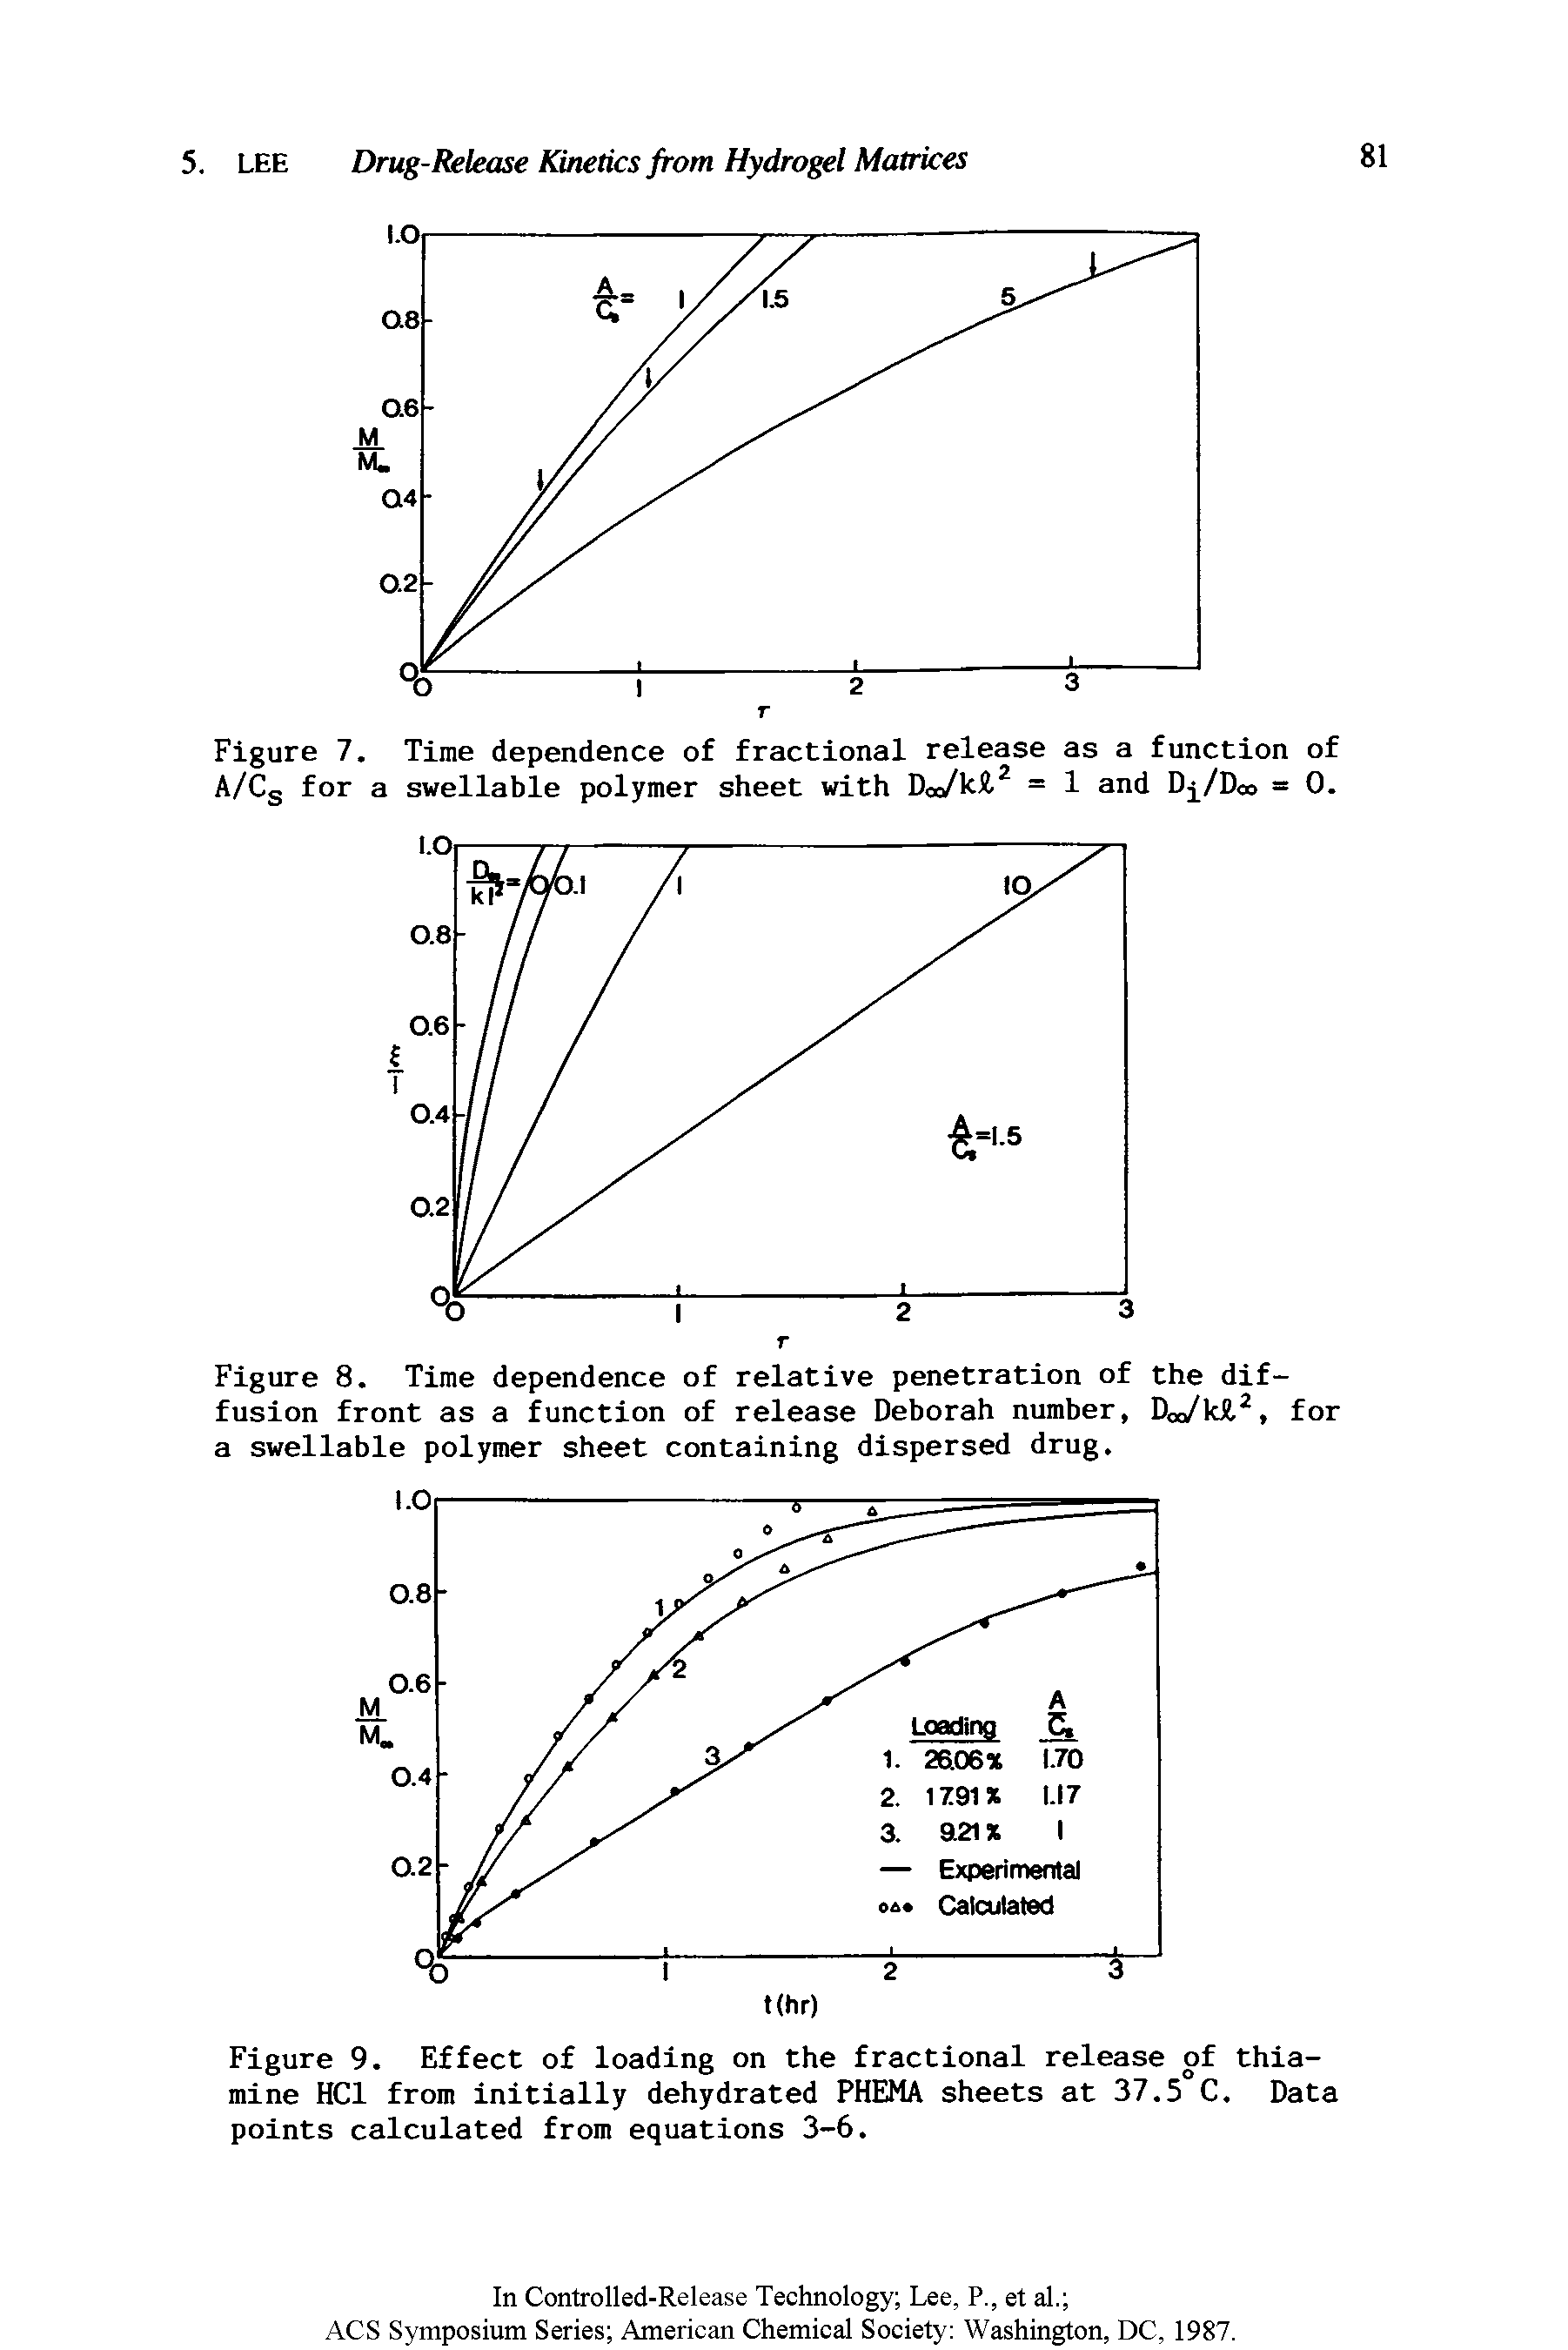 Figure 8. Time dependence of relative penetration of the diffusion front as a function of release Deborah number, Doo/ldl.2, for a swellable polymer sheet containing dispersed drug.